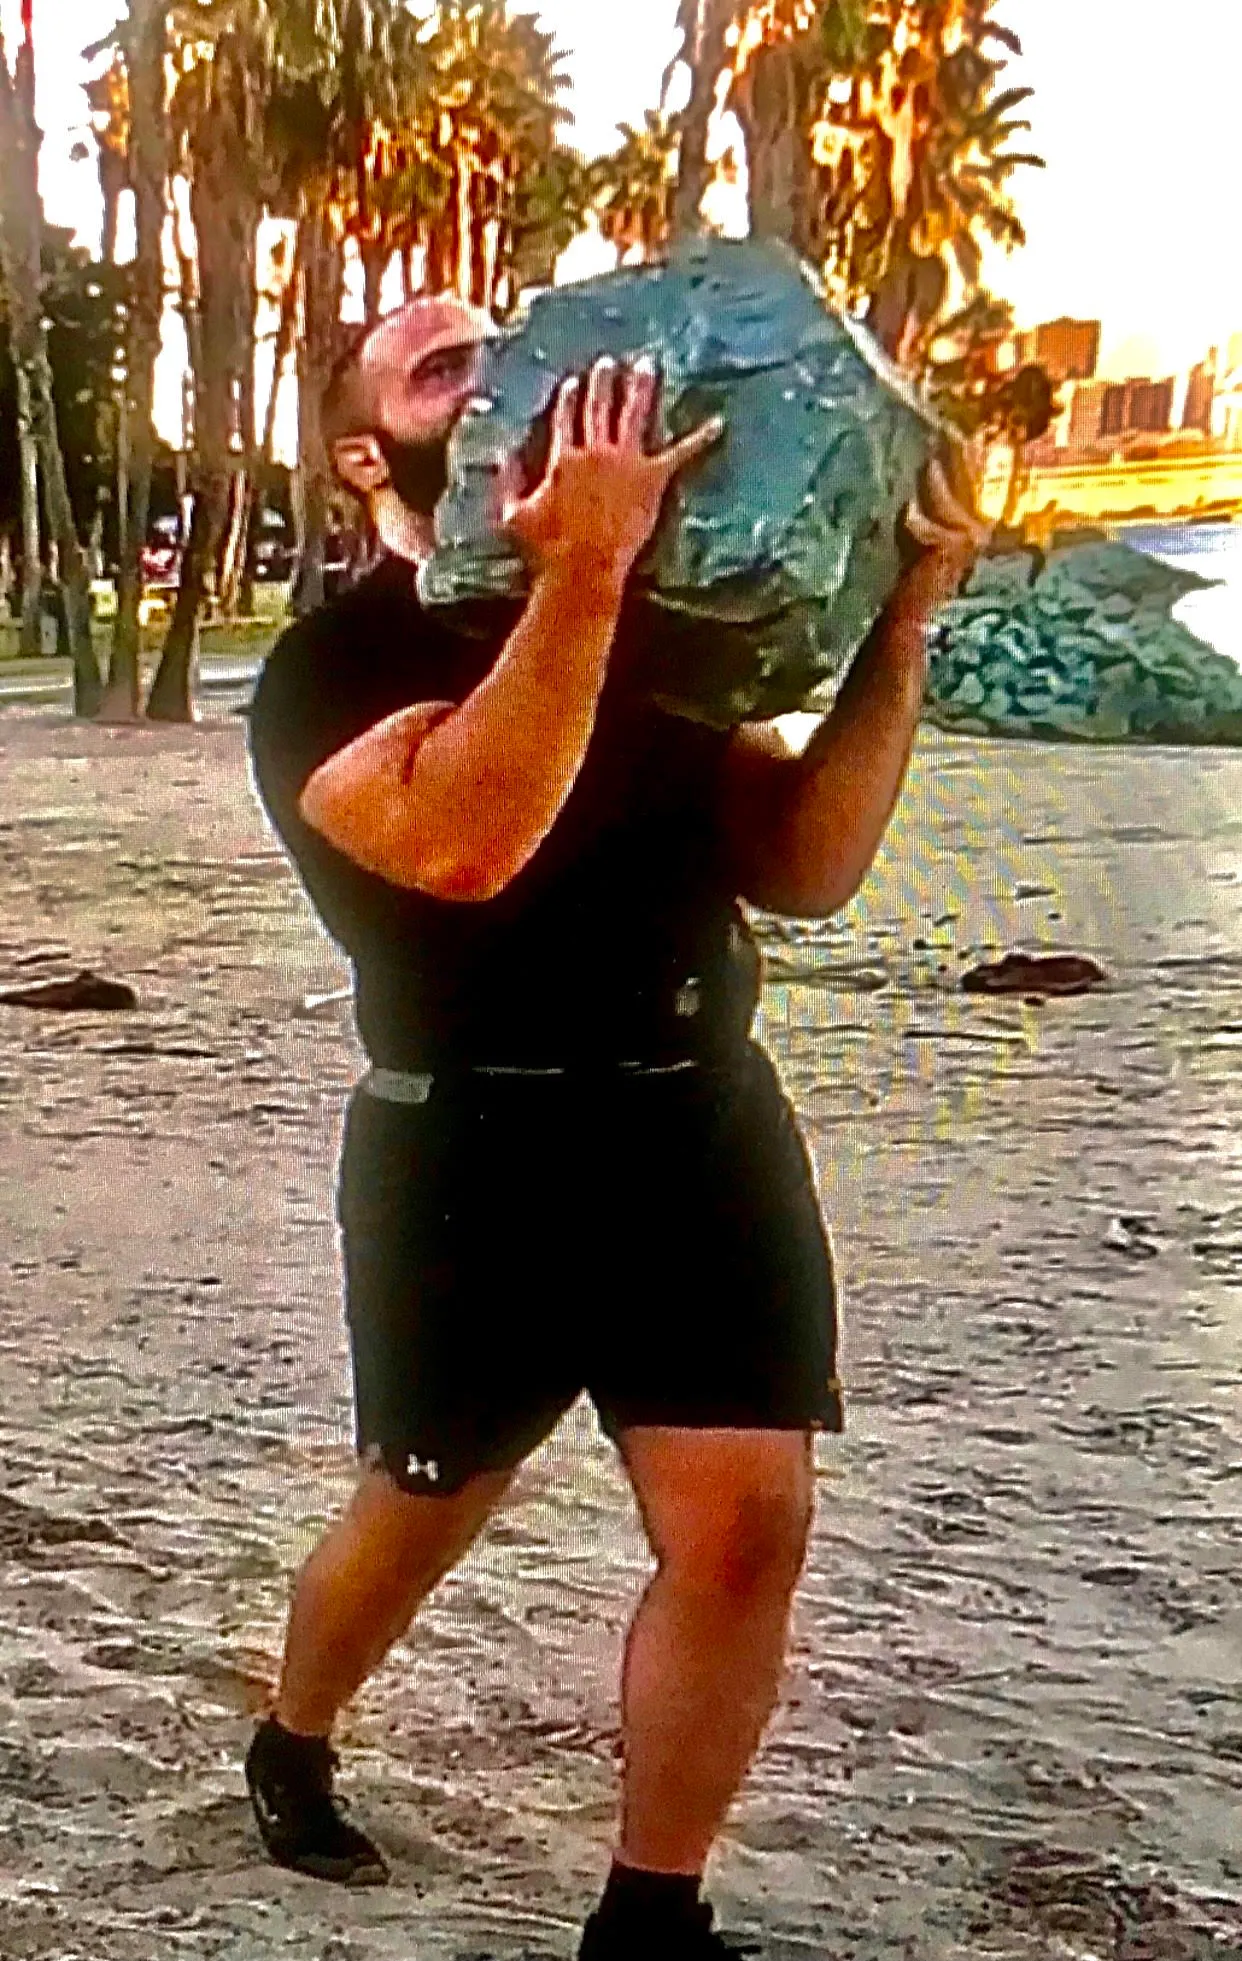 Gabriel carrying a large rock